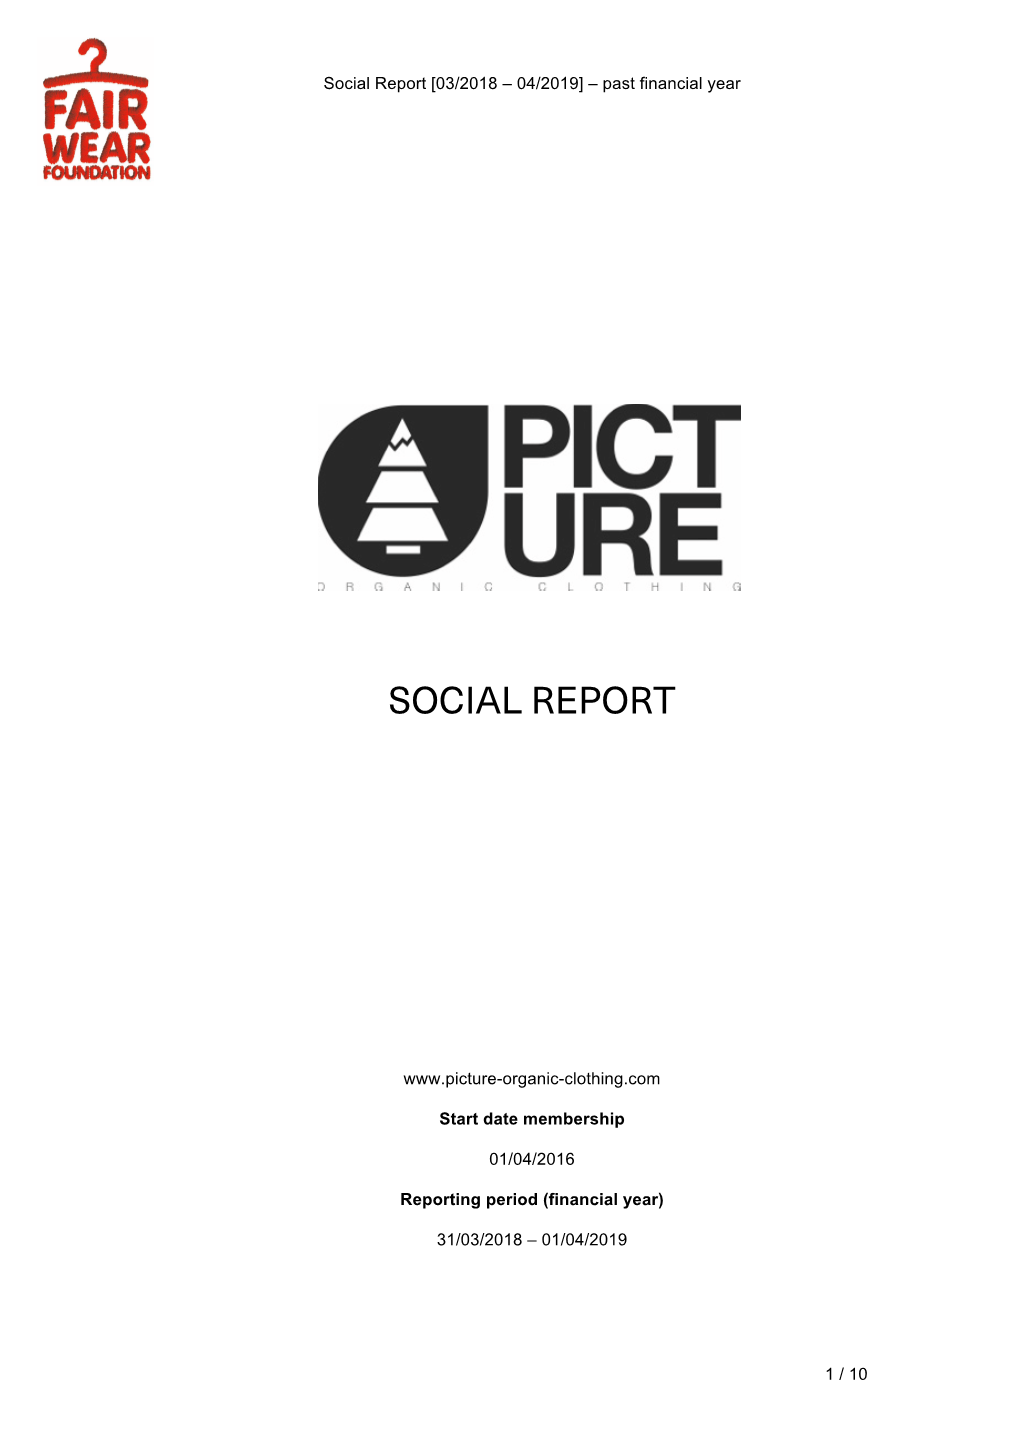 Social Report [03/2018 – 04/2019] – Past Financial Year